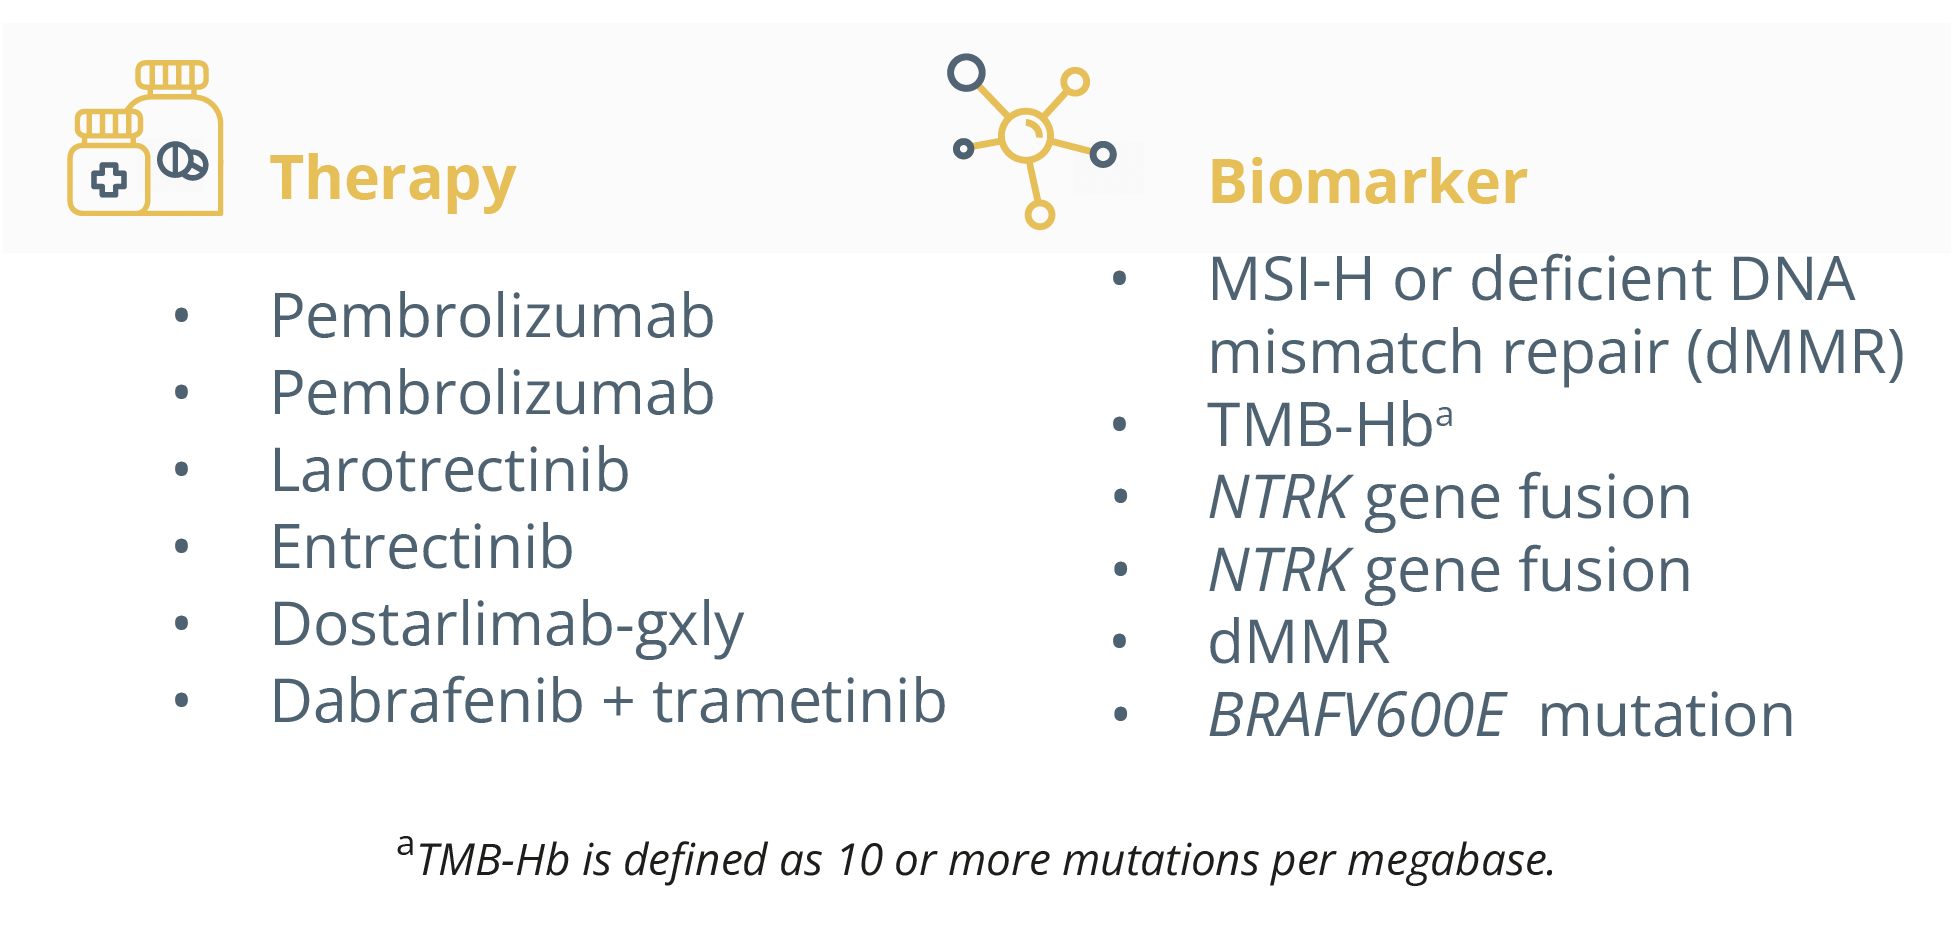 Tumour biomarkers and the therapeutic approaches associated with them.